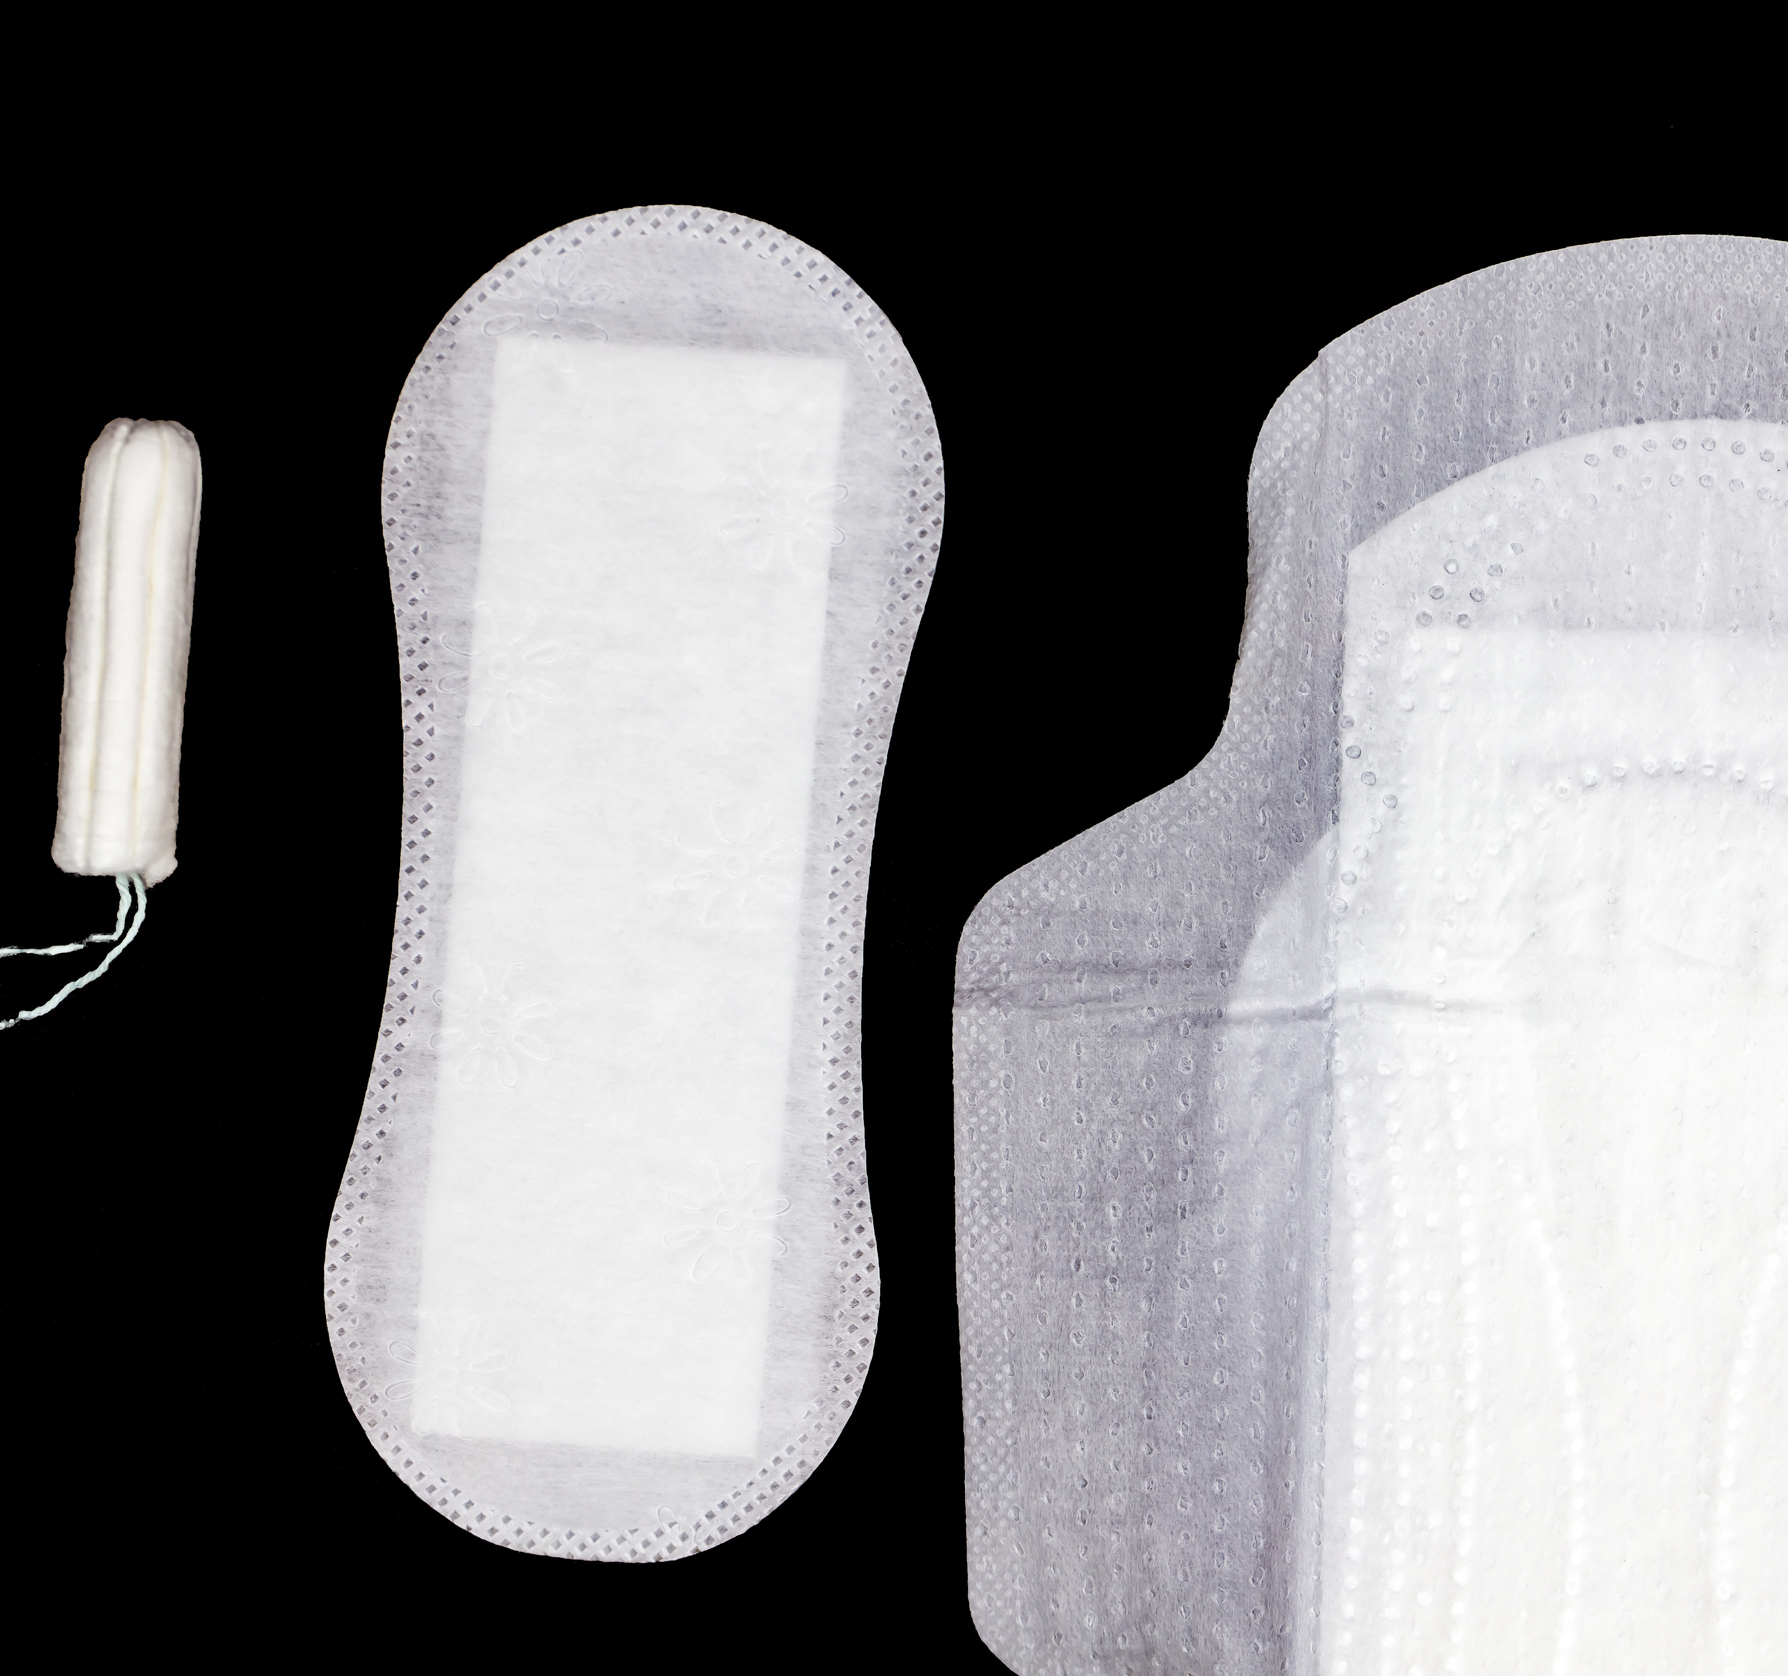 Feminine hygiene products including a tampon and sanitary pads on a dark background